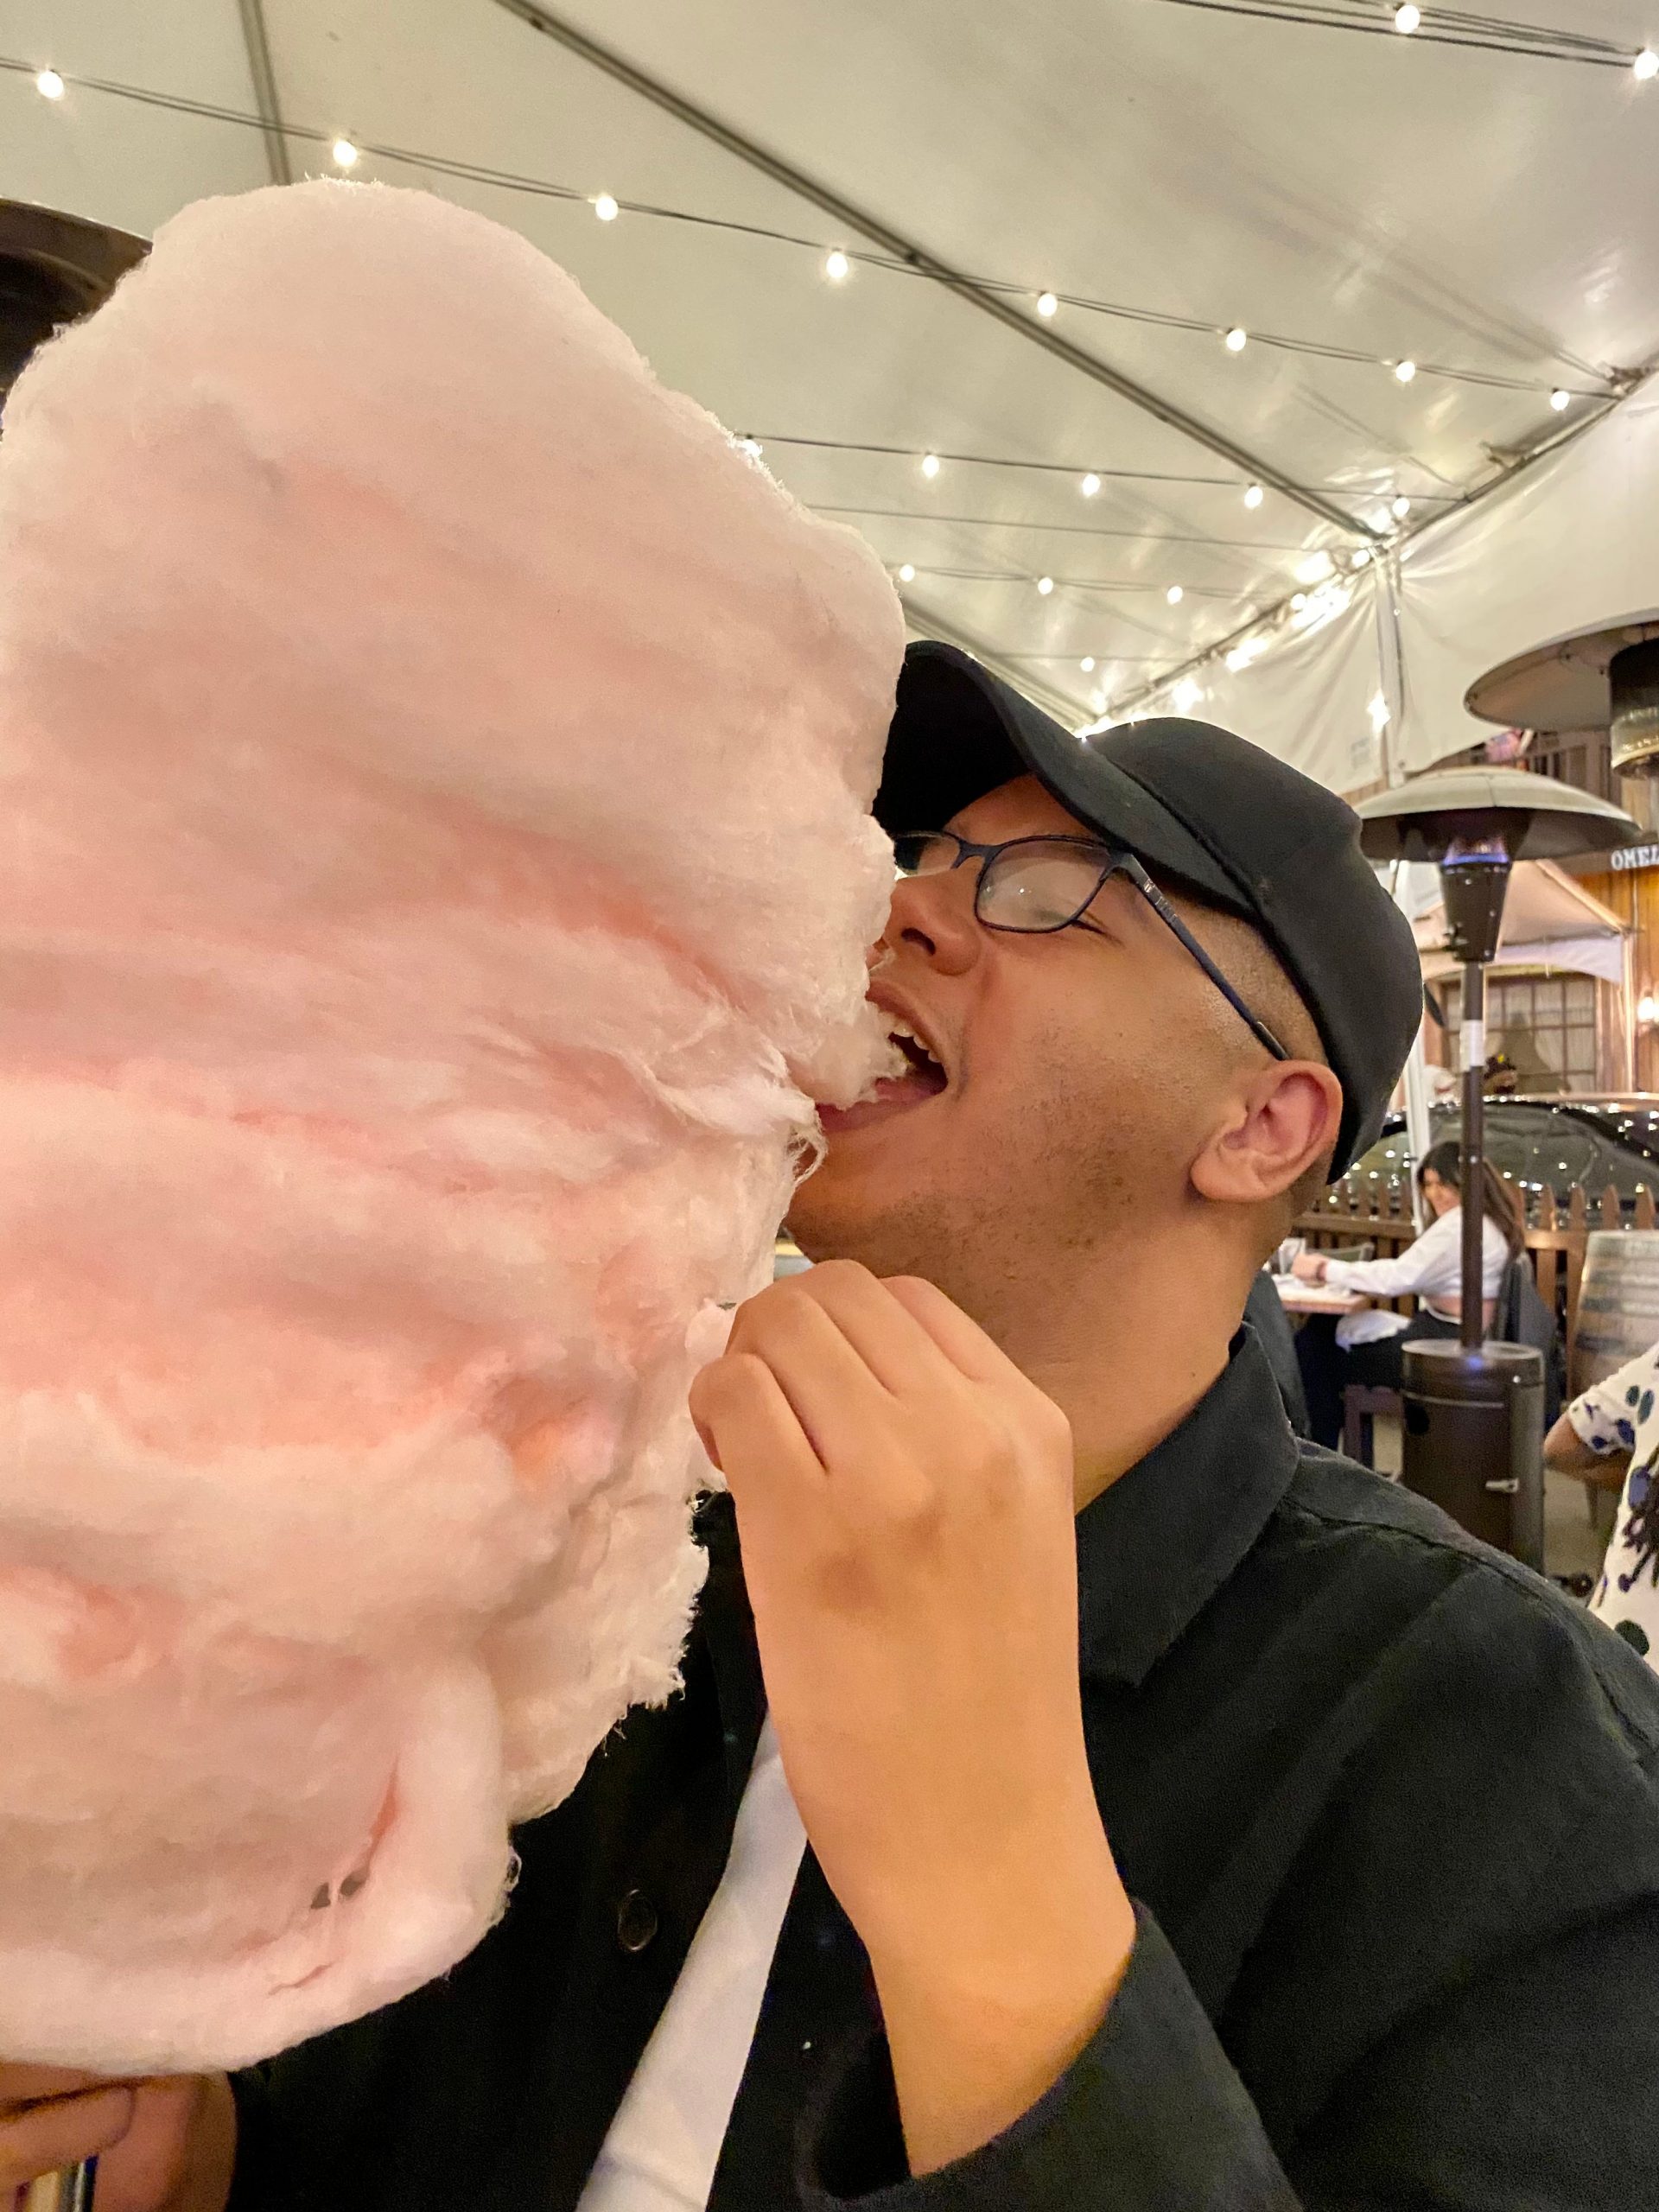 Cotton Candy Tower